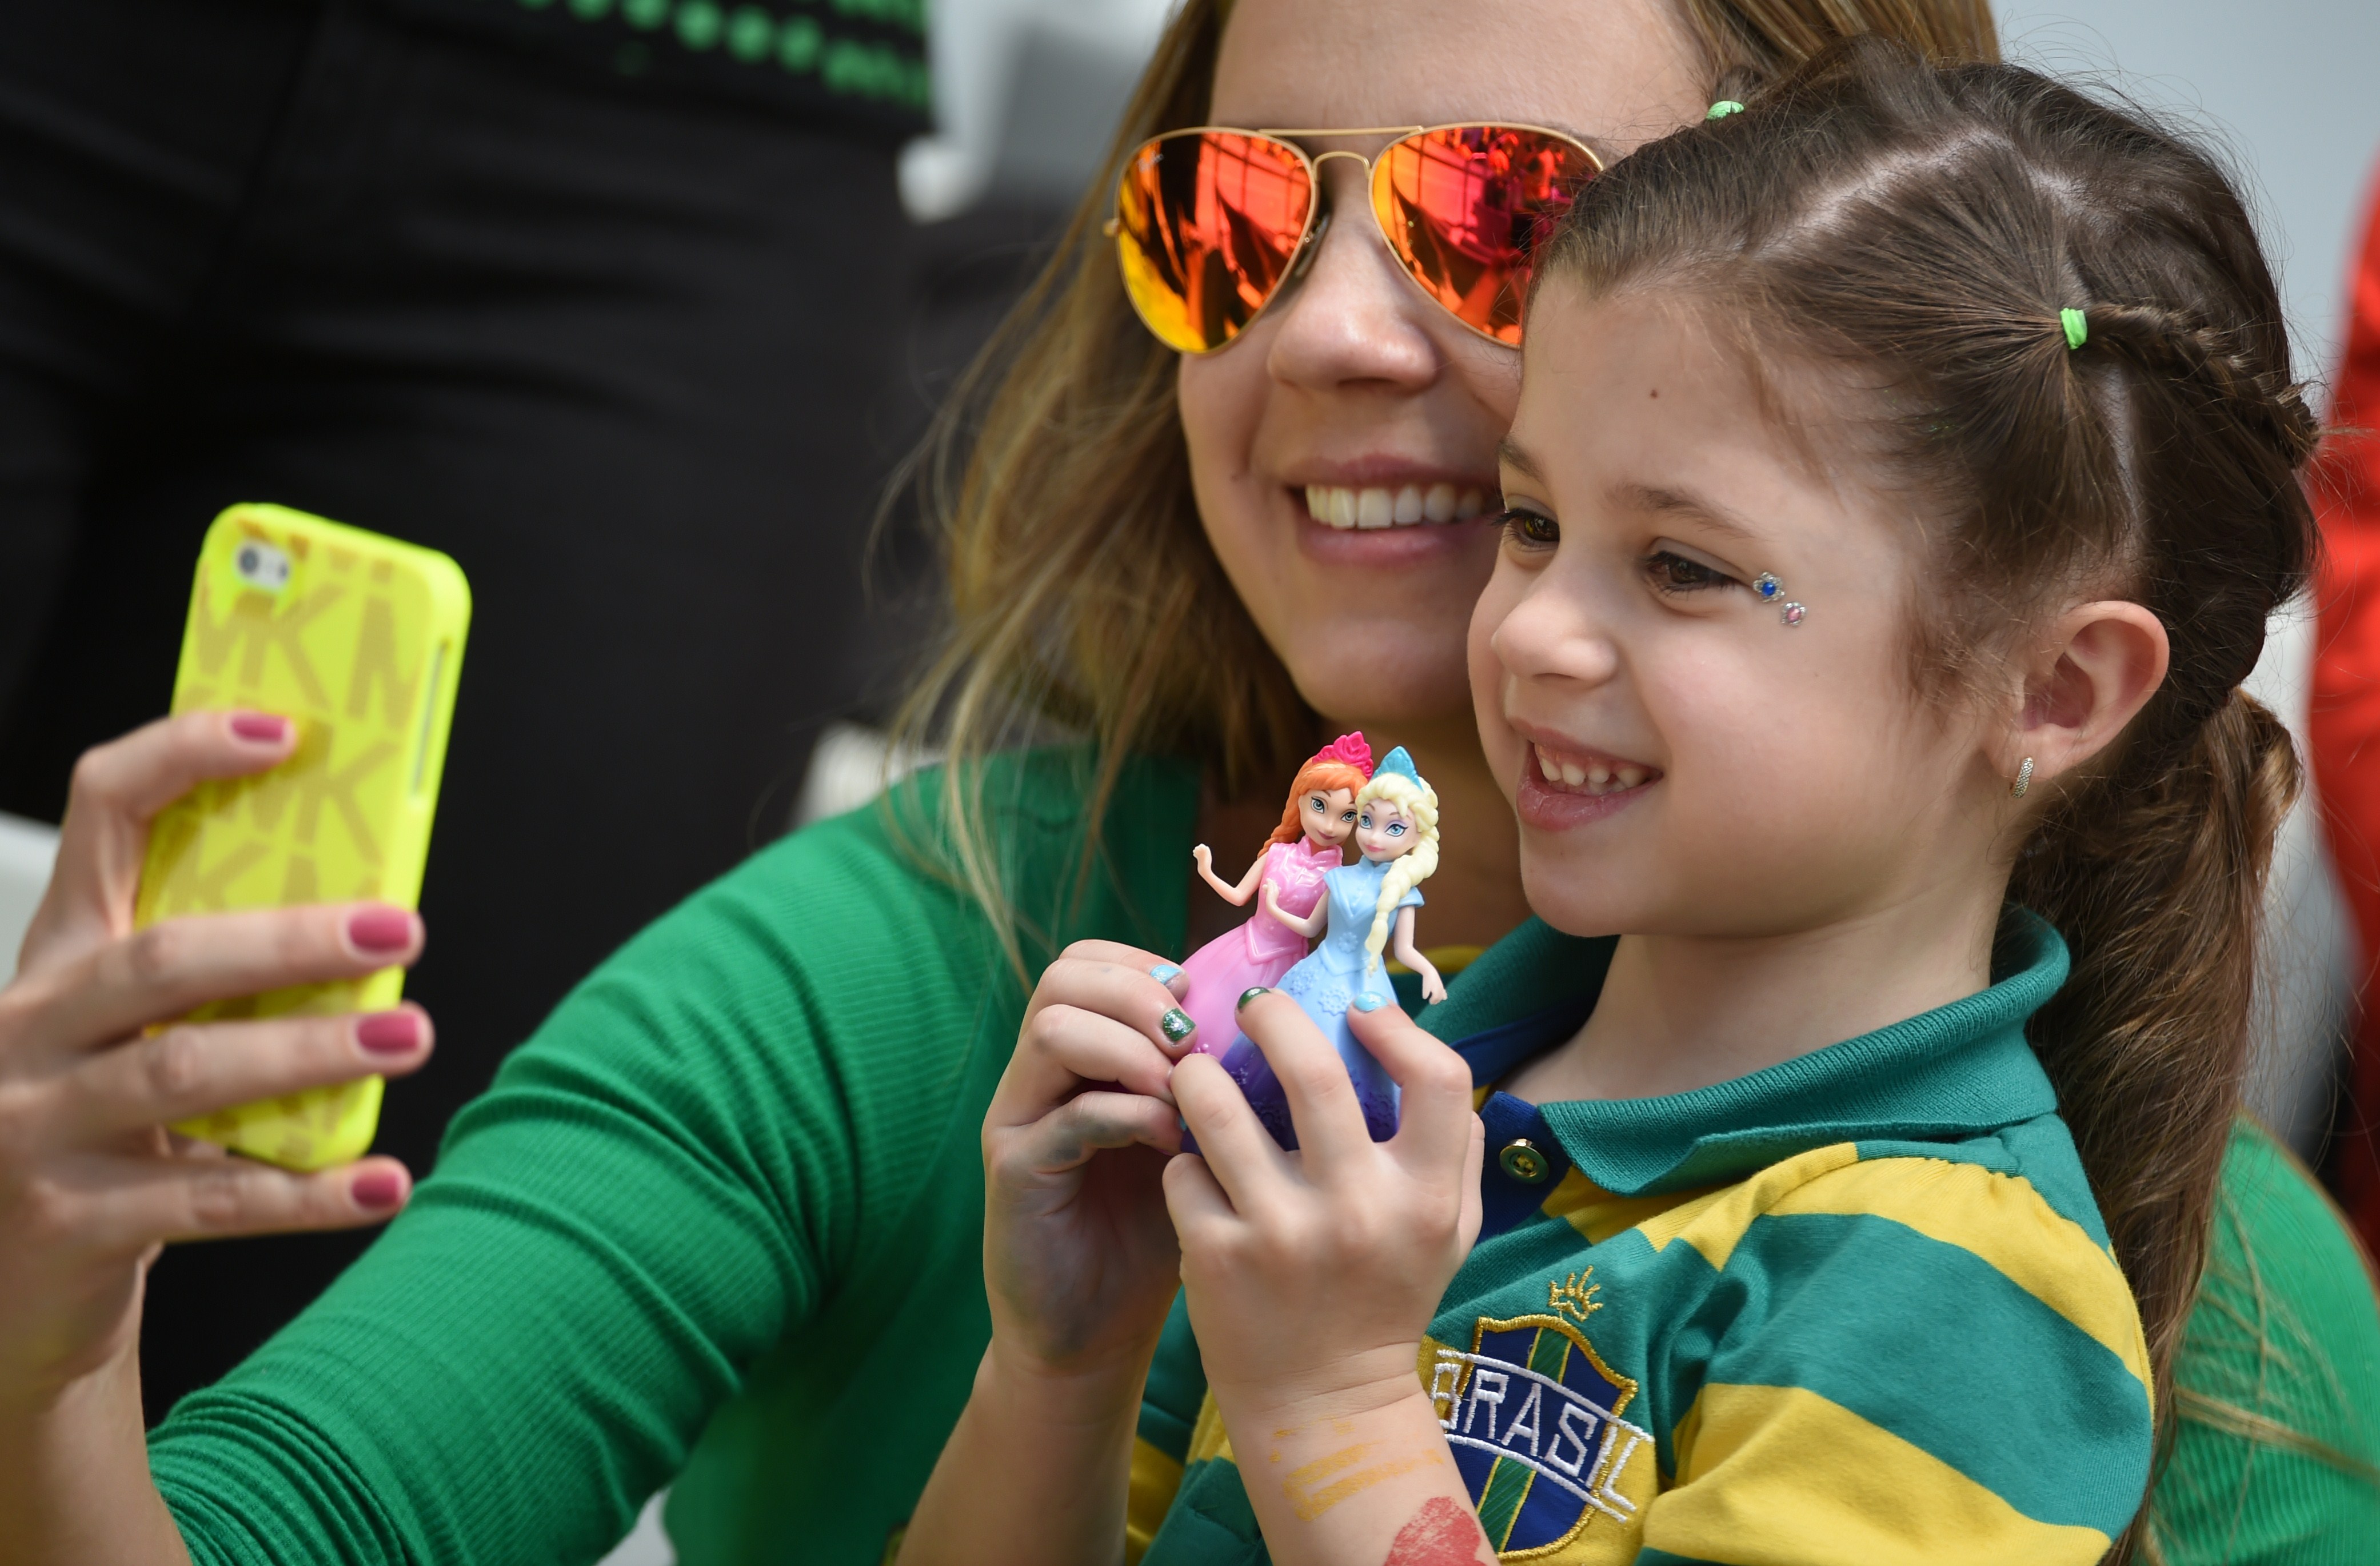 Australian fans take a picture with a smartphone before a Group B football match between Australia and Spain at the Baixada Arena in Curitiba during the 2014 FIFA World Cup on June 23, 2014. (William West—AFP/Getty Images)